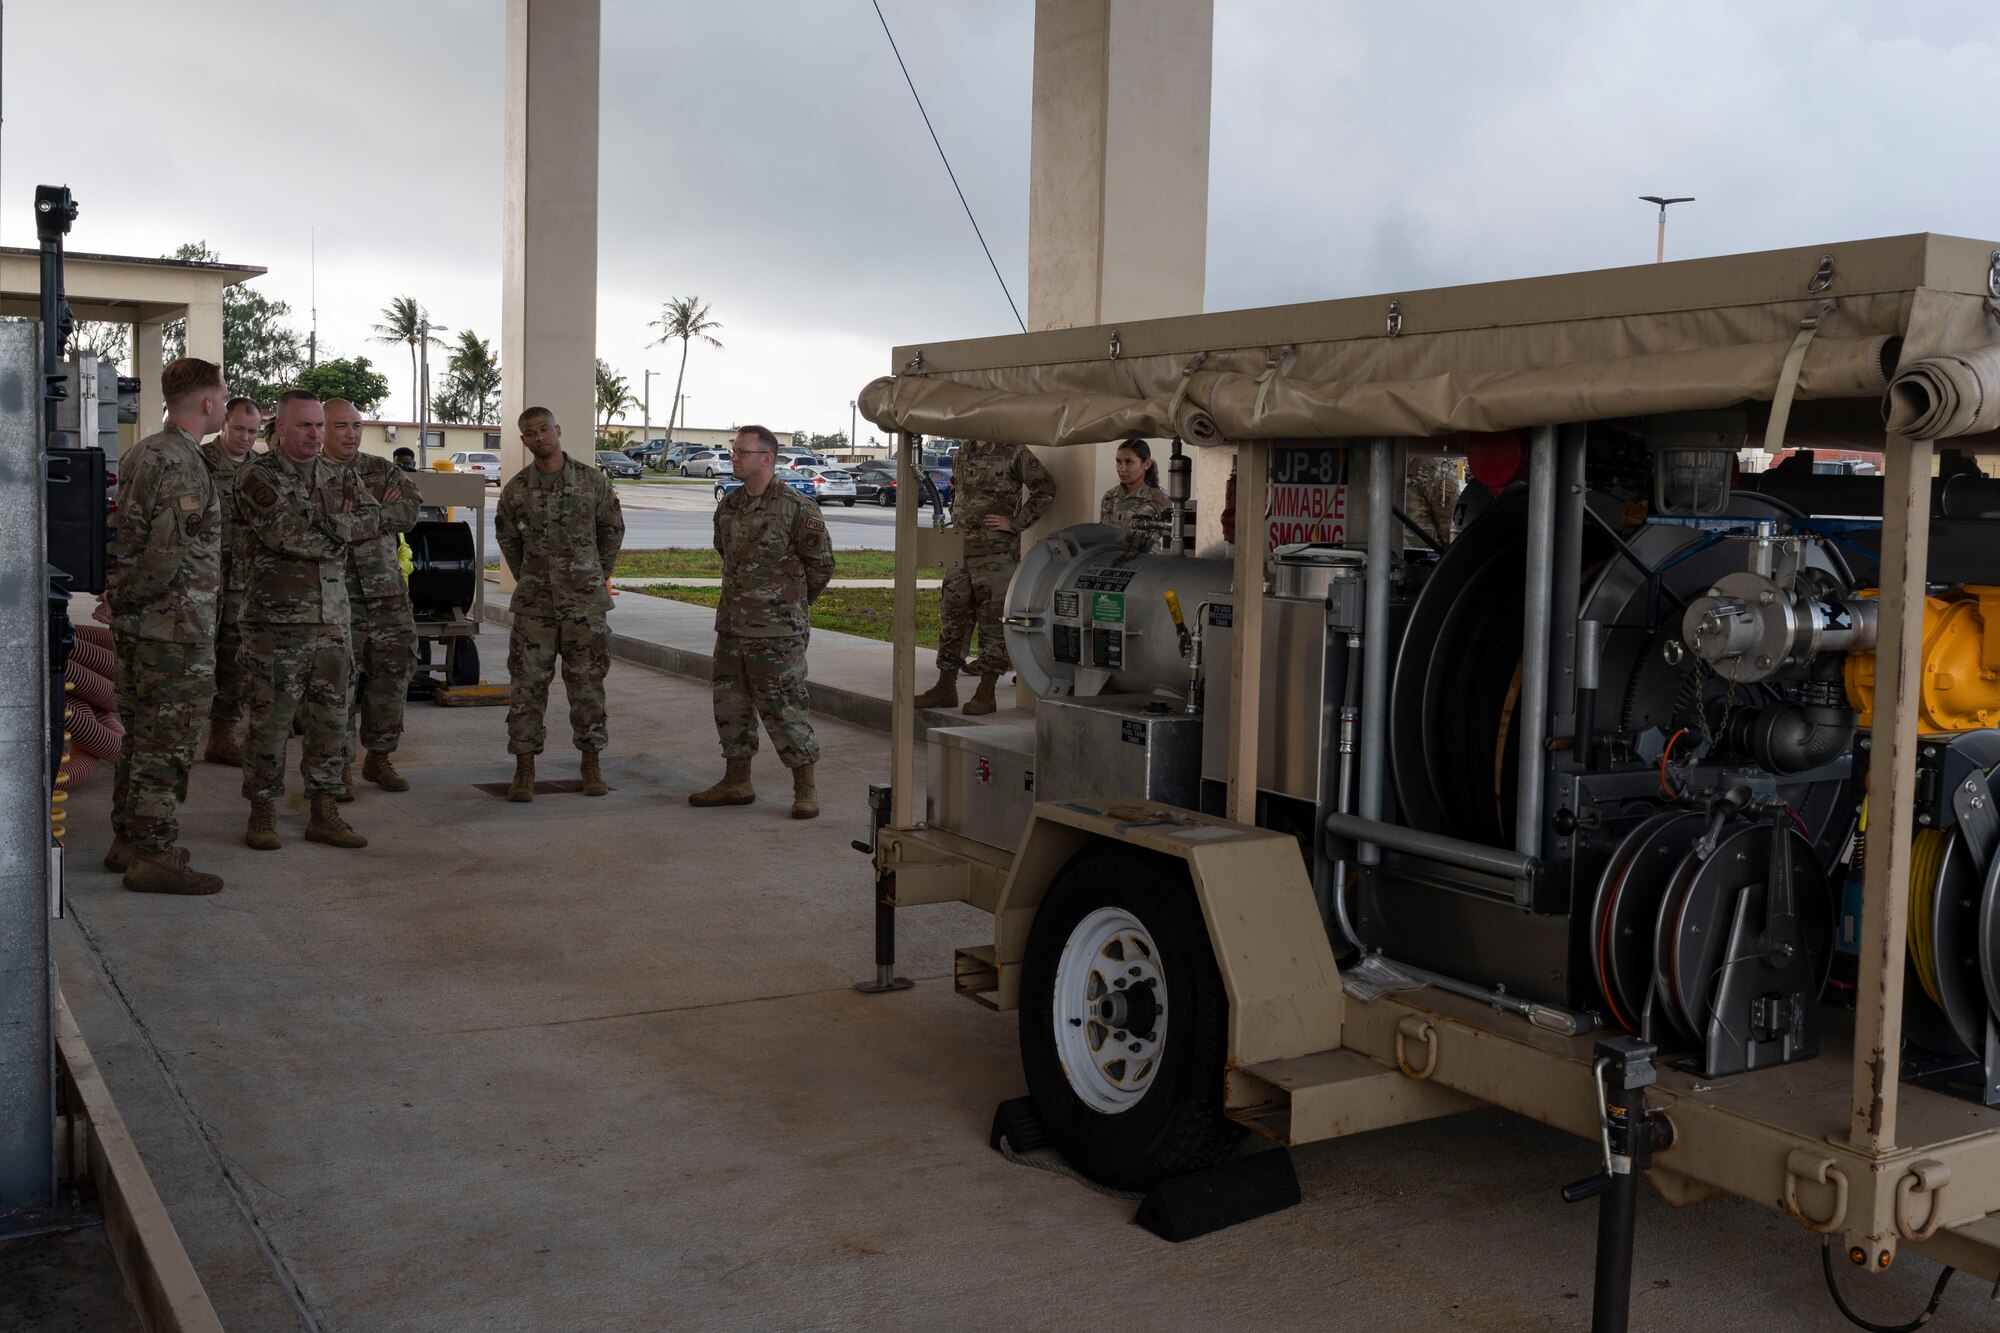 U.S. Air Force Chief Master Sgt. David R. Wolfe, Pacific Air Forces command chief, is briefed on the capabilities of a fuels Starcart by Airmen with the 36th Logistics Readiness Squadron at Andersen Air Force Base, Guam, April 14, 2022.